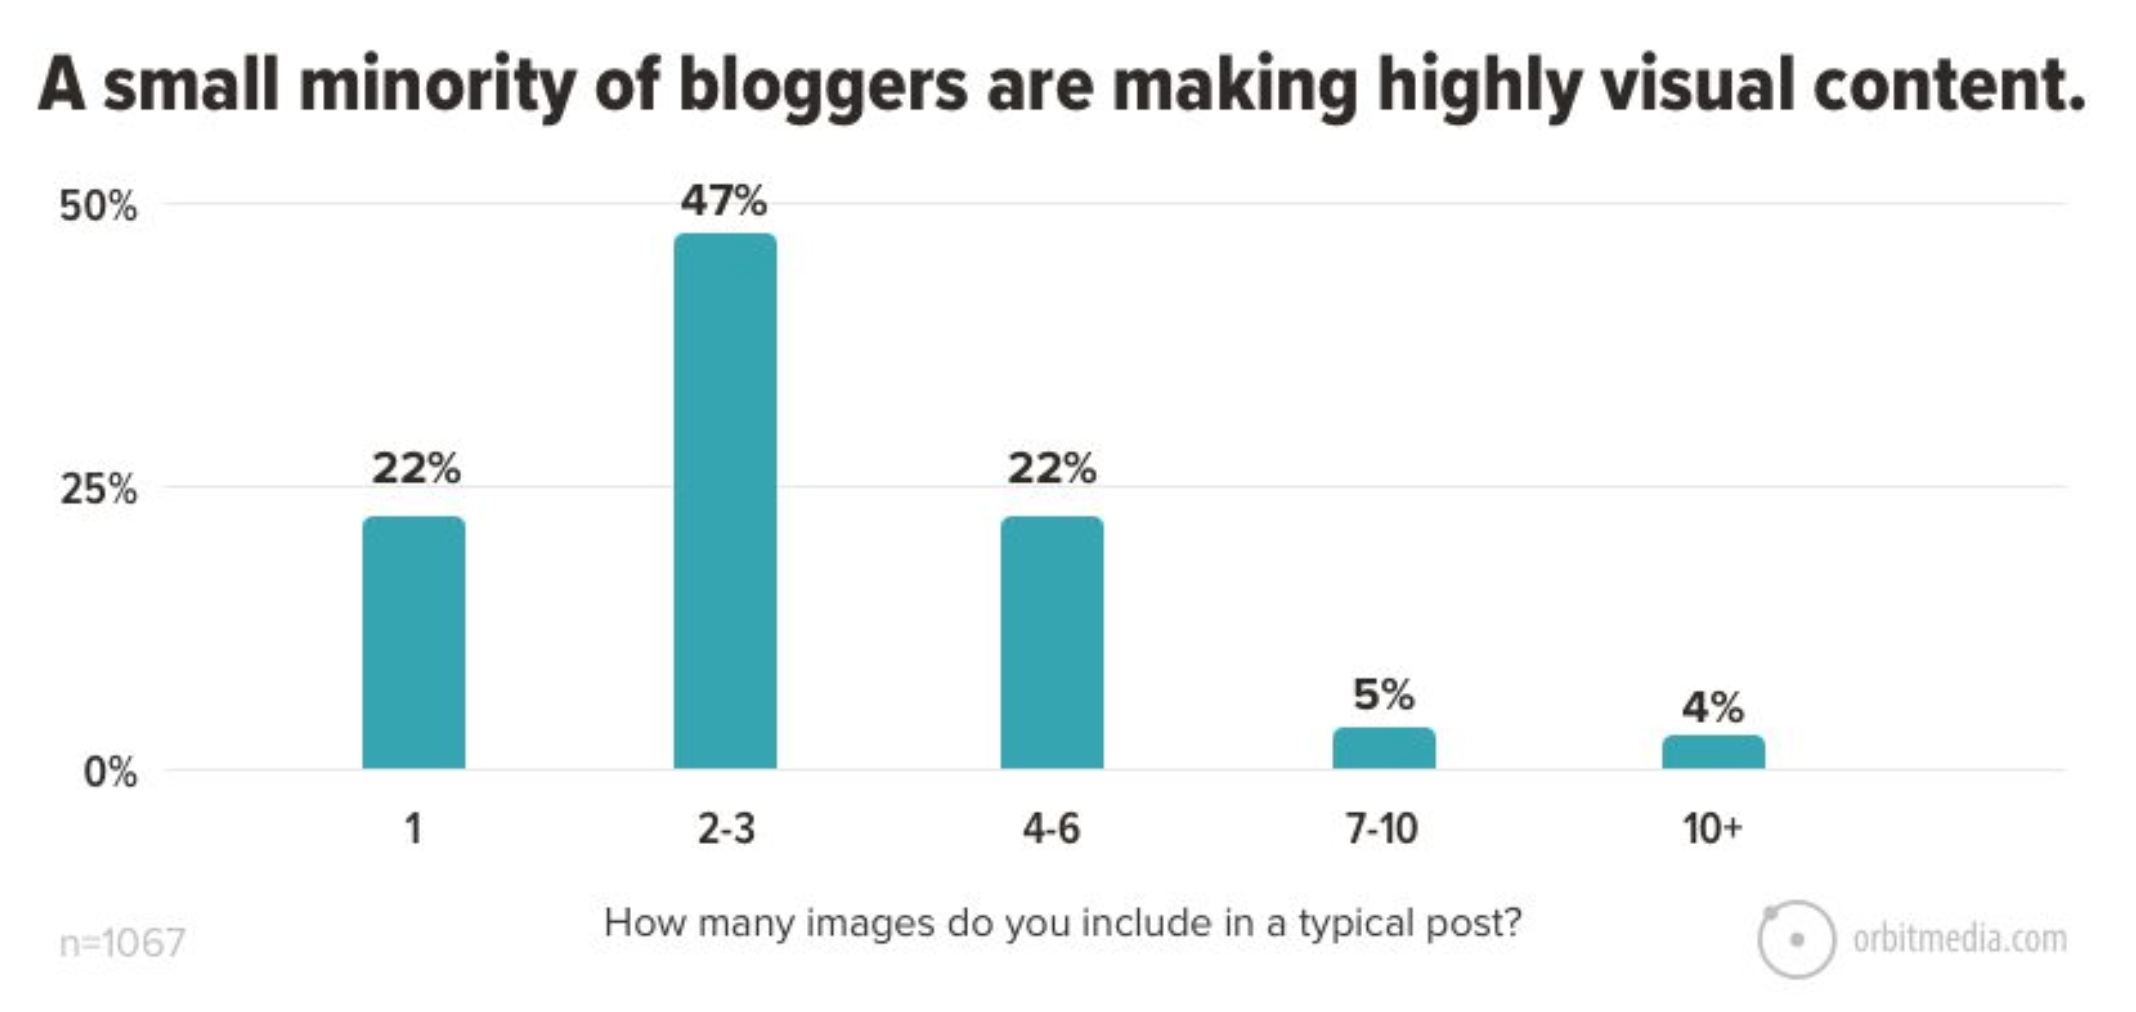 A Small Minority of Bloggers Are Making Highly Visual Content